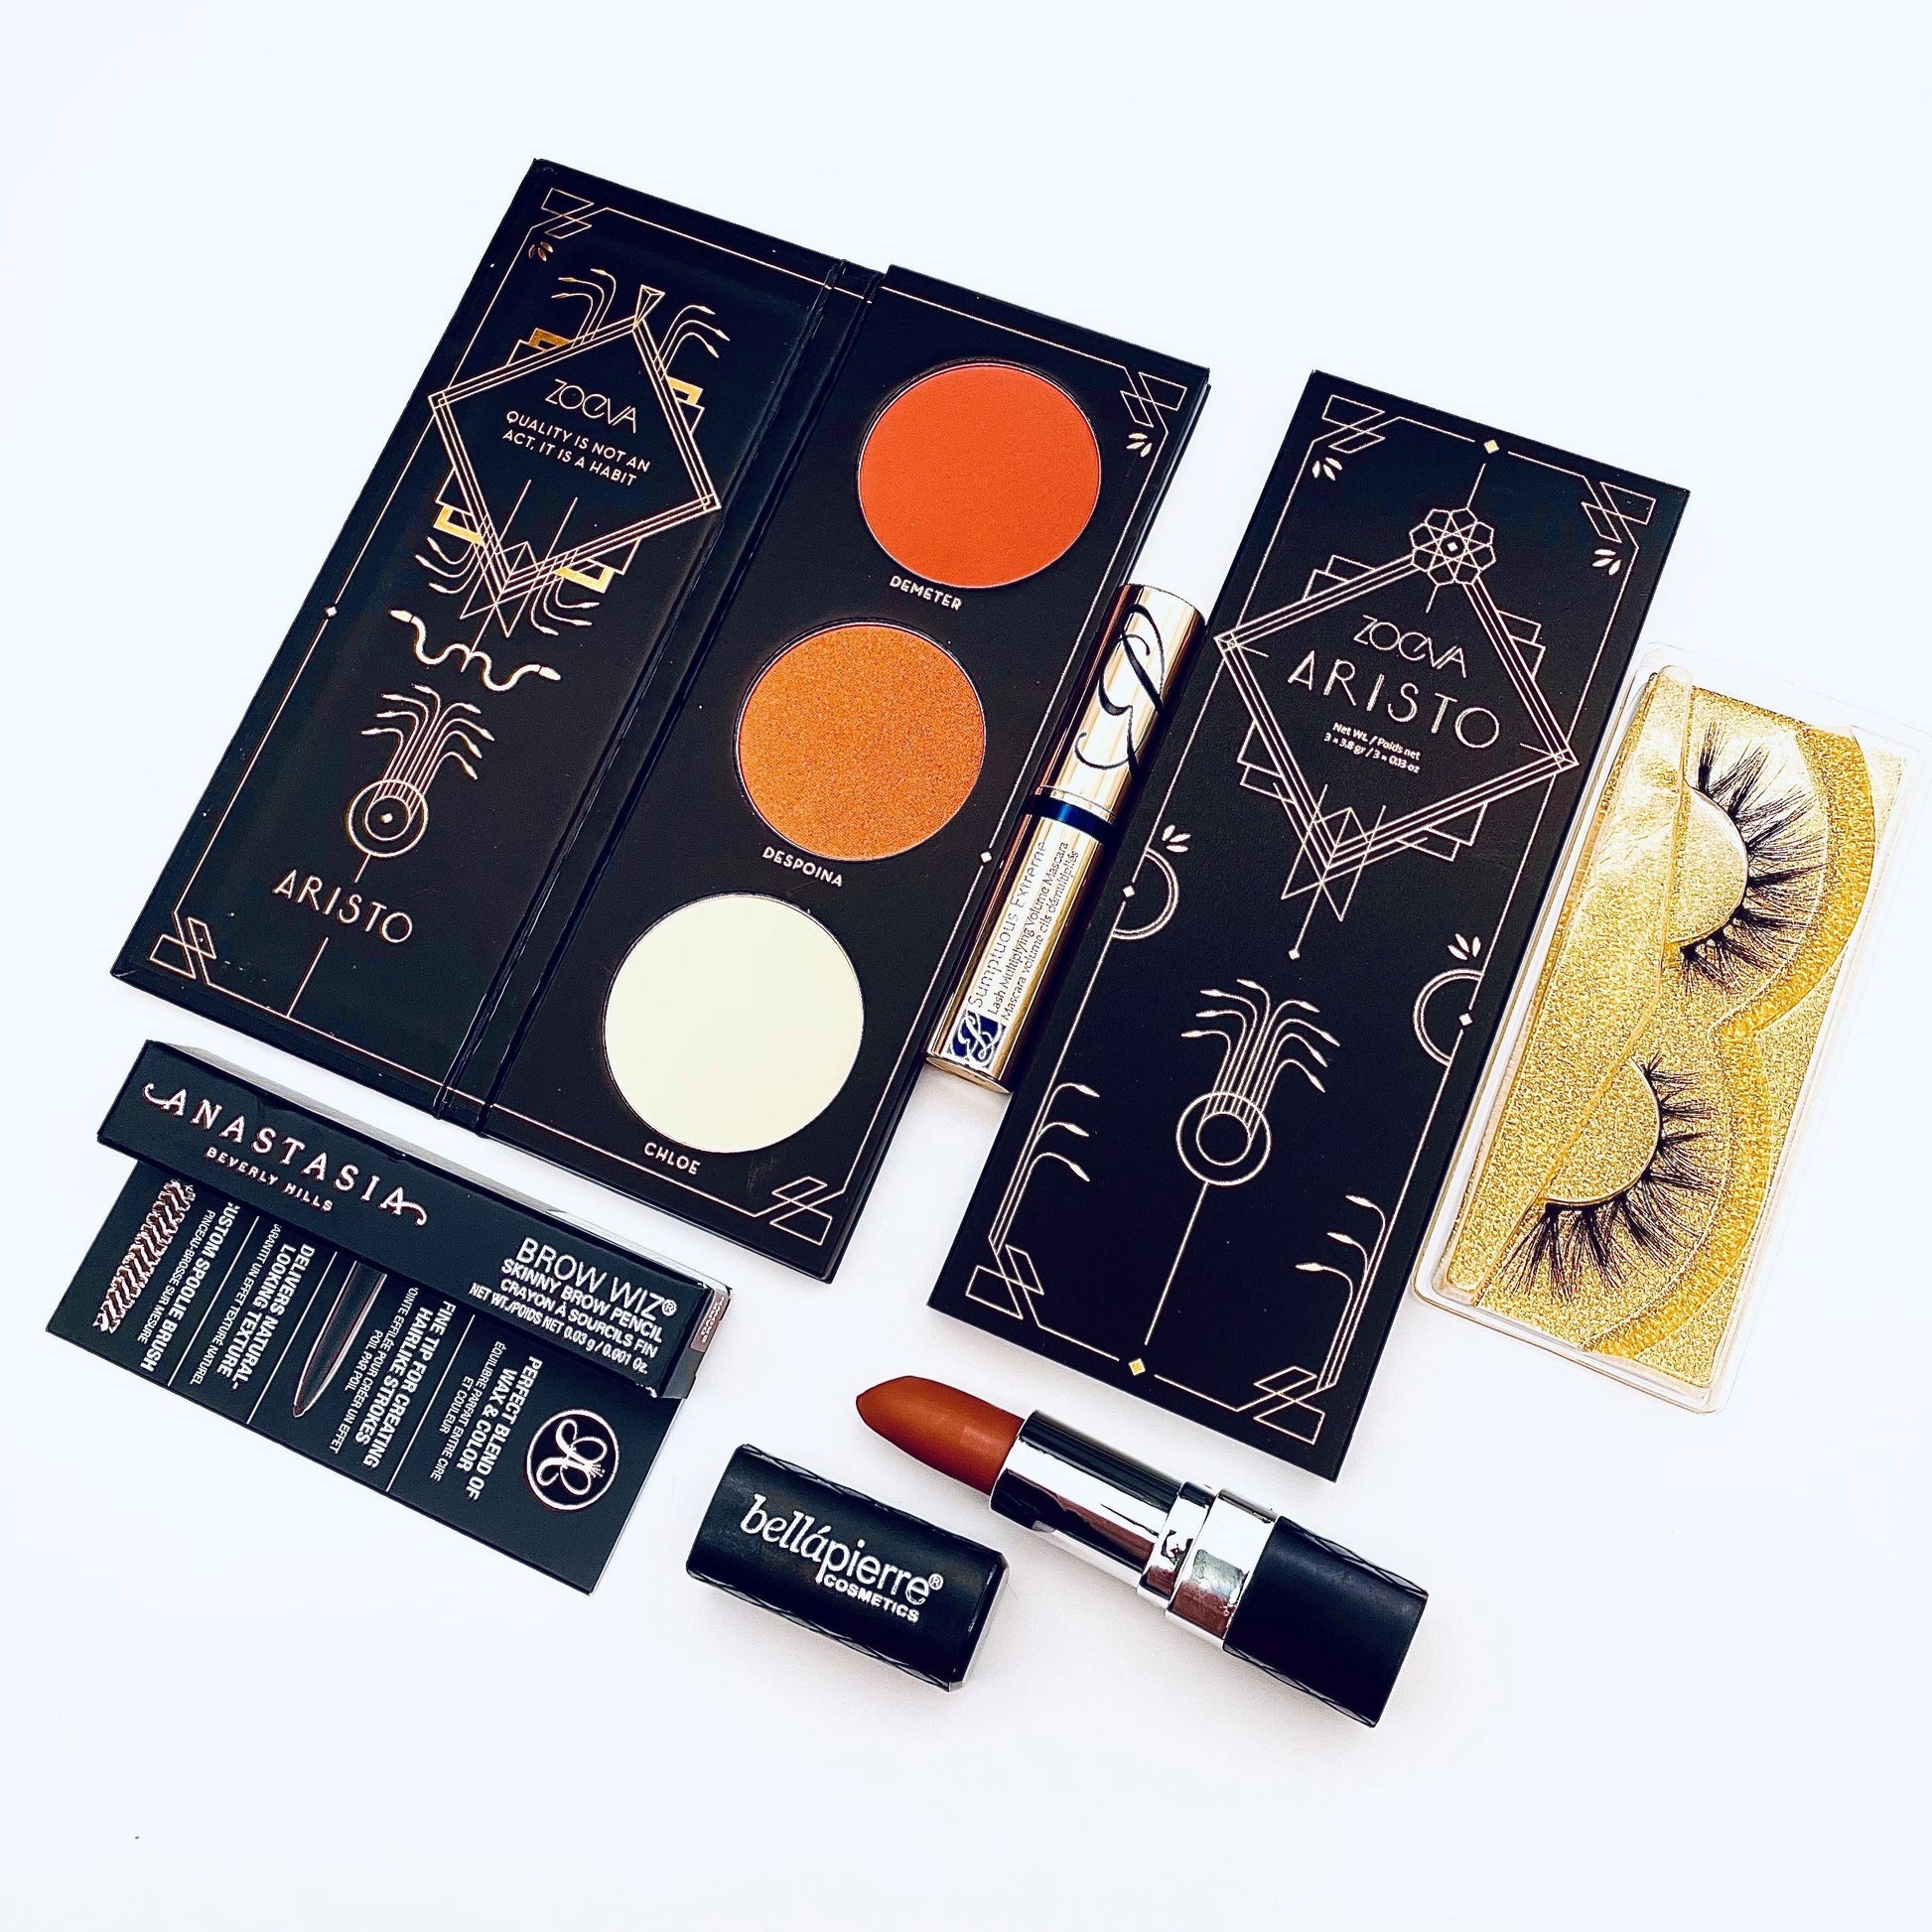 zoeva 5 piece makeup bundle, excellent for gifts & makeup professionals alike. This bundle comes with one estee lauder sumptuous extreme mascara, one Anastasia brow wiz skinny brow pencil, one bellapierre mineral infused matte lipstick in The Color Incognito, 22mm in length 100% vegan wispy all natural eyelash set that can be worn with or without makeup up to 18 times with proper care & Free gifts 